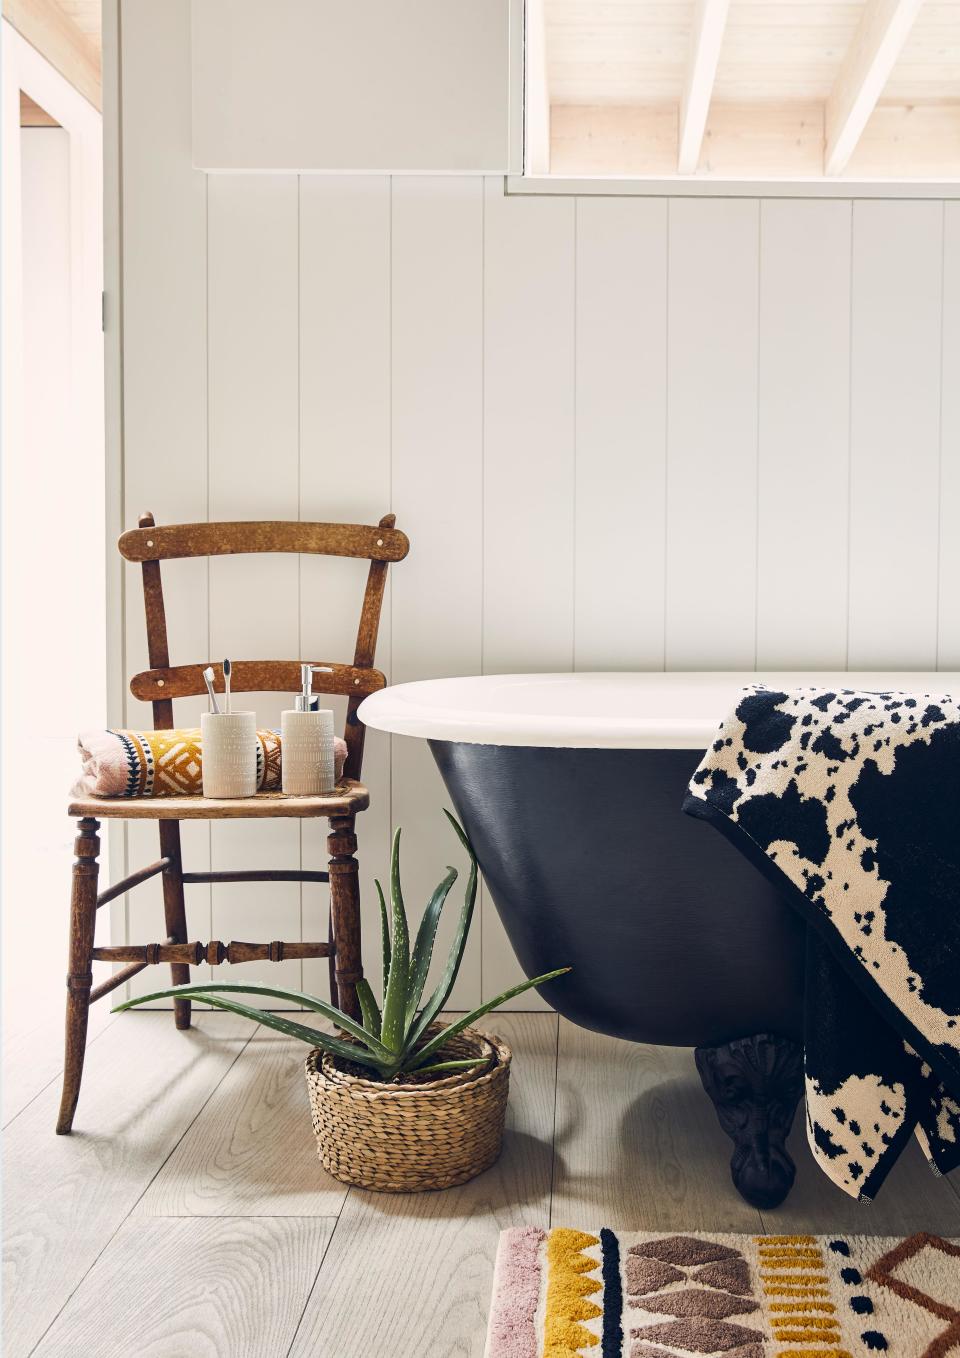 <p> If you have a roll-top bath, or even a bath with a panel, painting it can give it a new lease of life. It's also a great way to start a new color scheme in your bathroom – we love the dark bath against the fresh white walls and the pattern of the bath mat and towel (which is Asda, would you believe?).  </p>